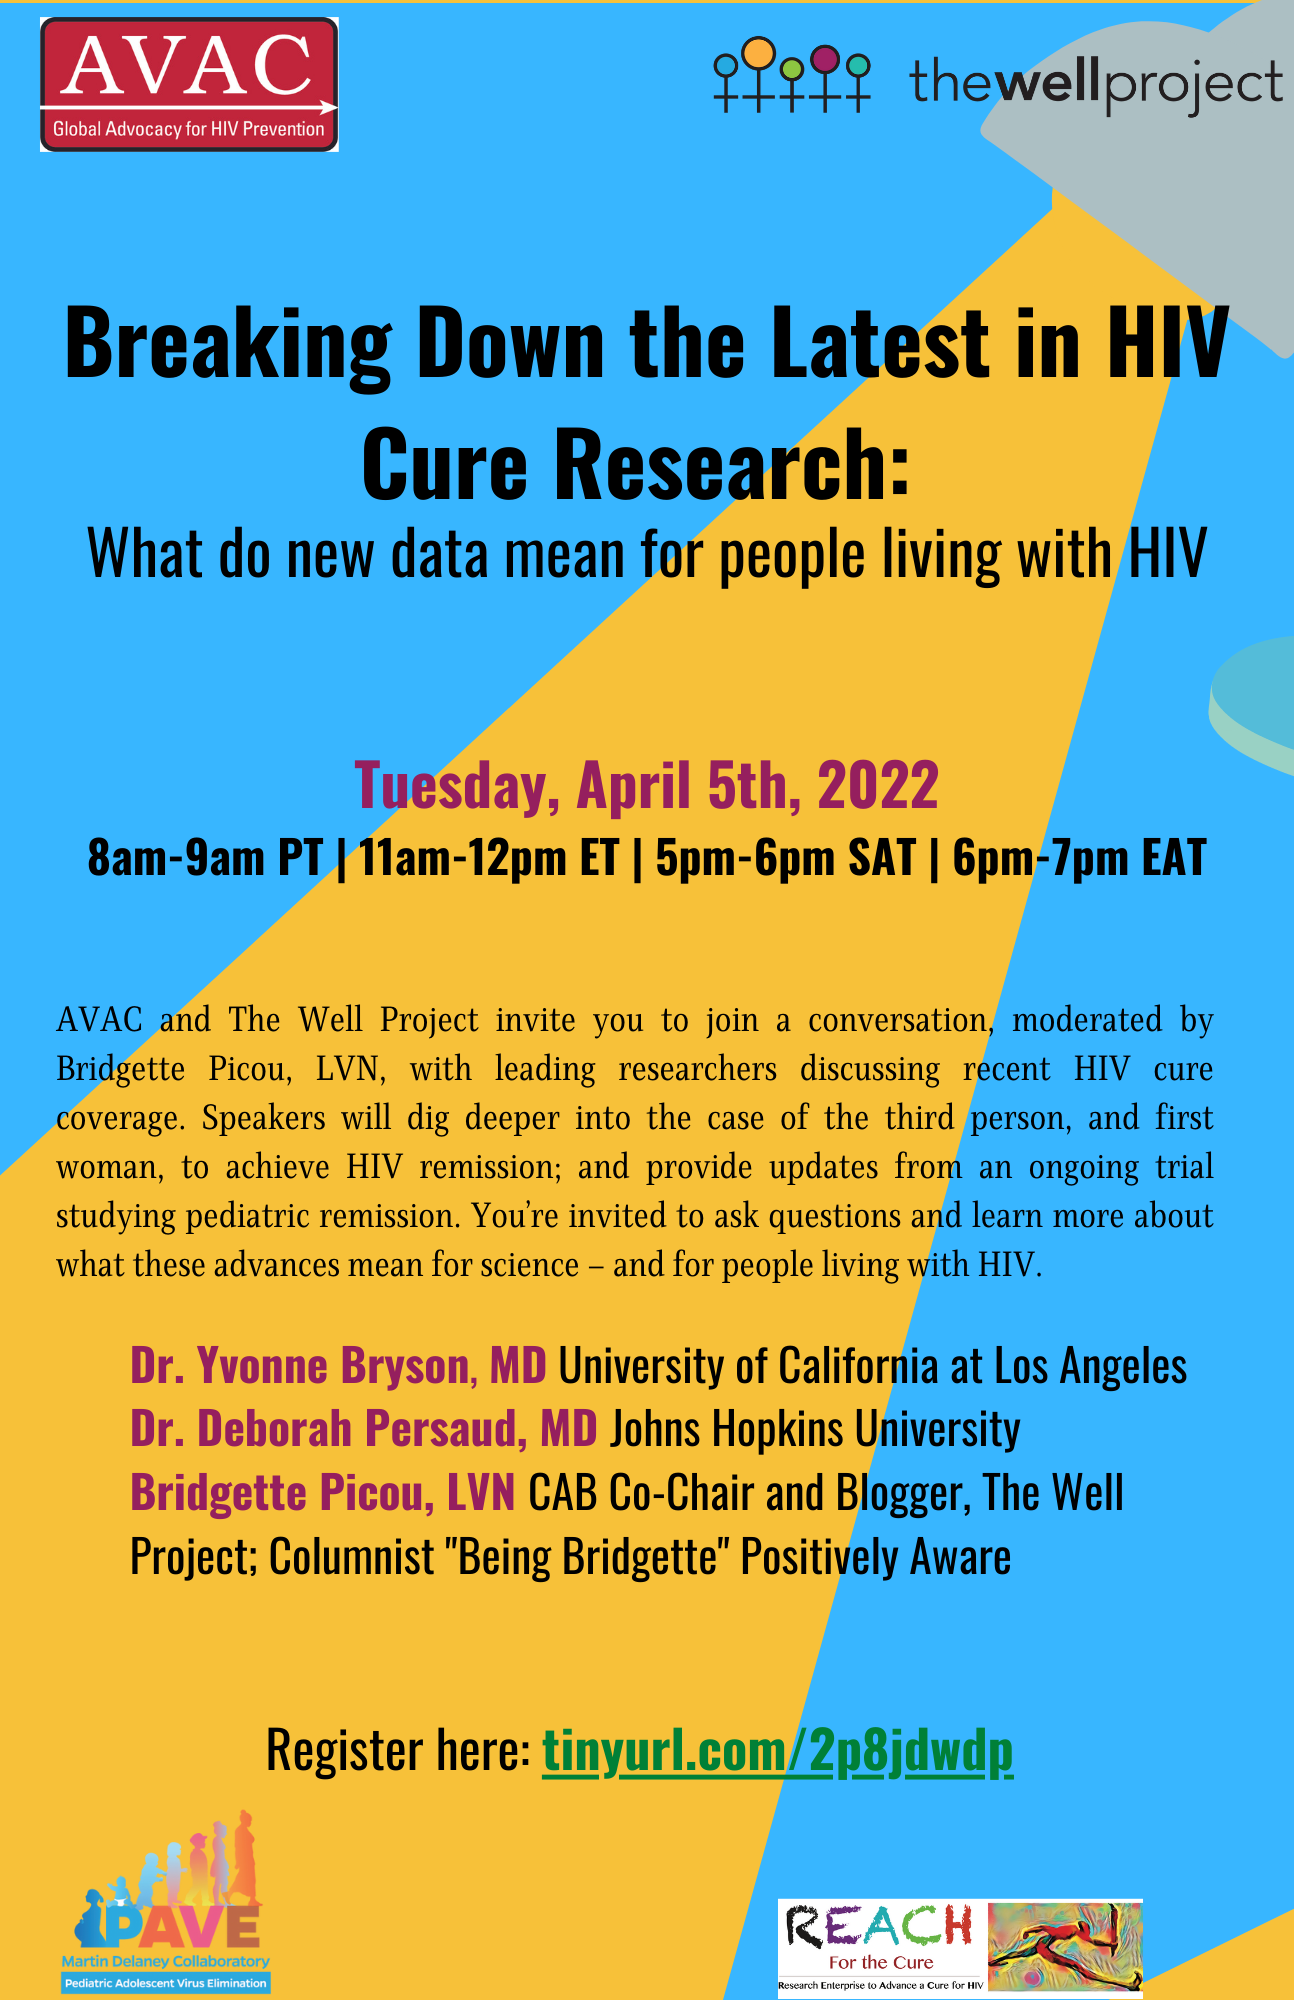 Breaking Down the Latest in HIV Cure Research April 5, 2022 The